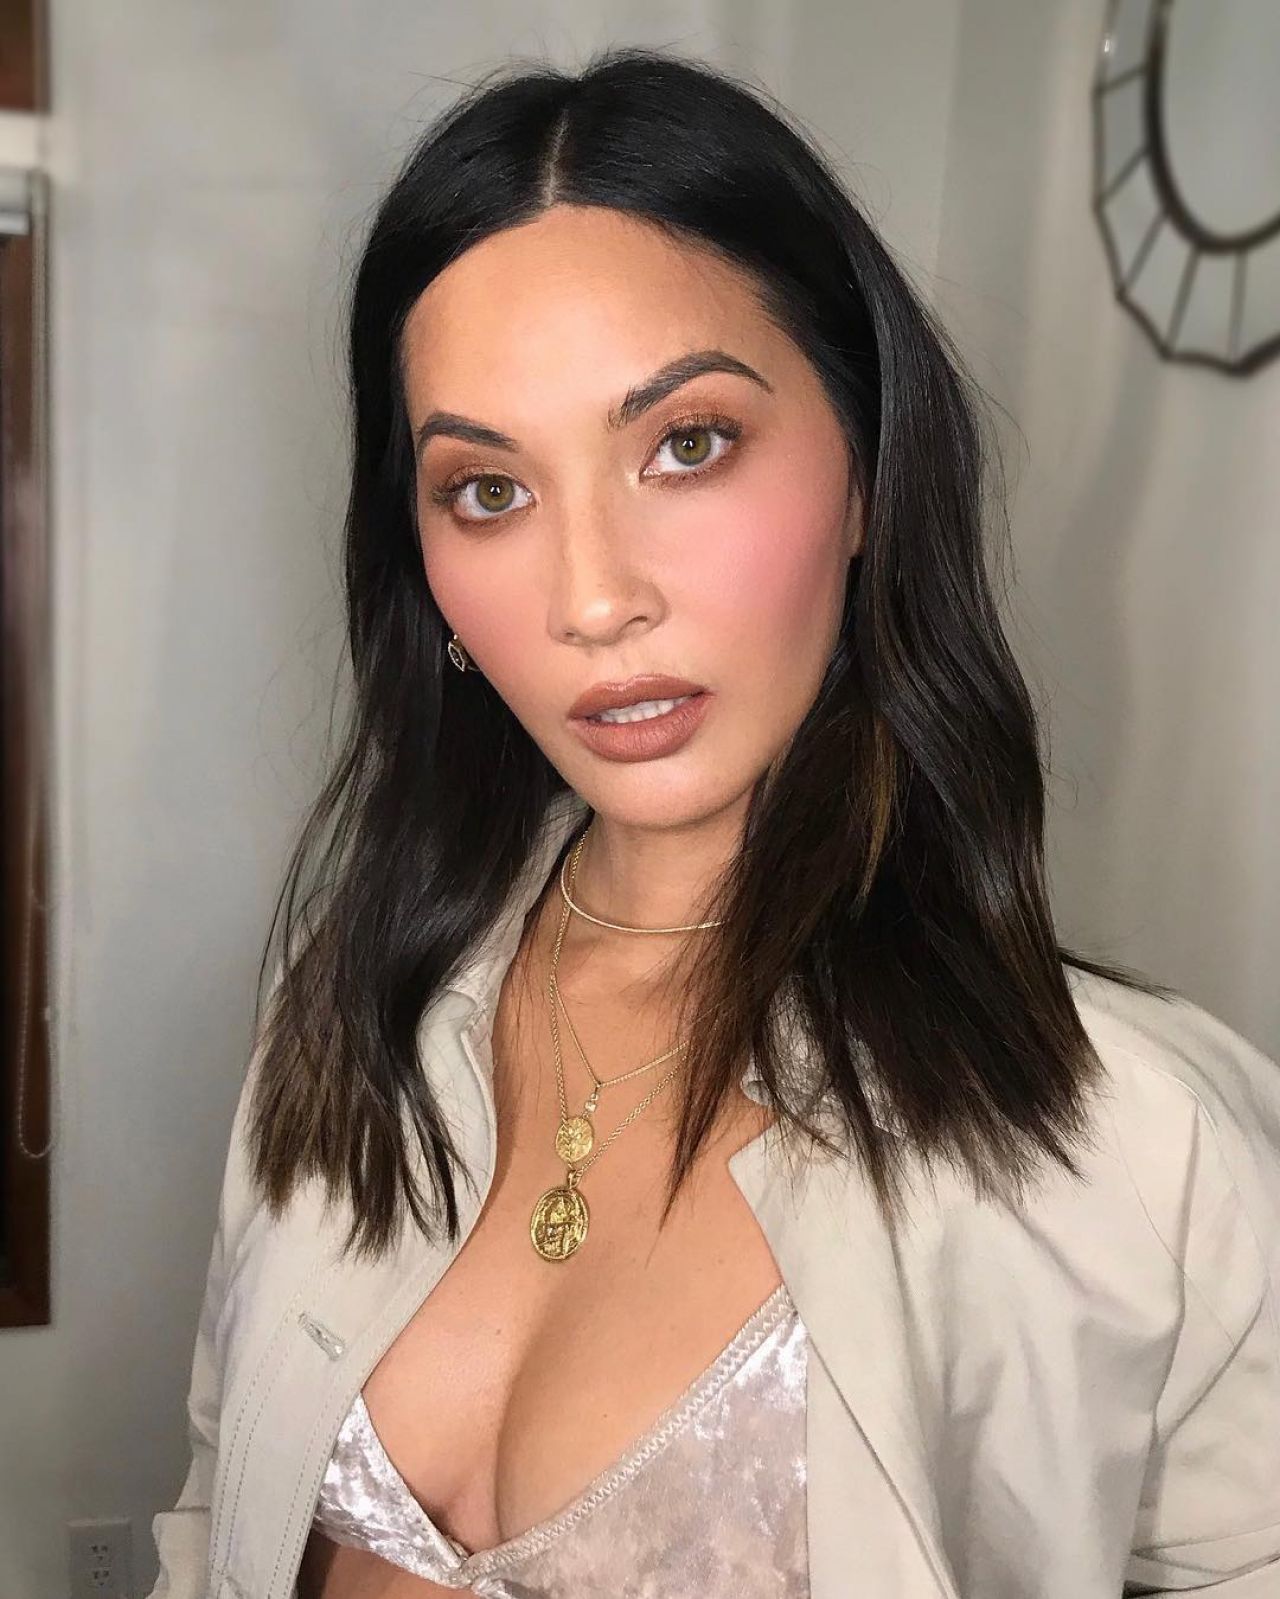 Olivia Munn gorgeous selfies, Amazing boobs and cleavage!